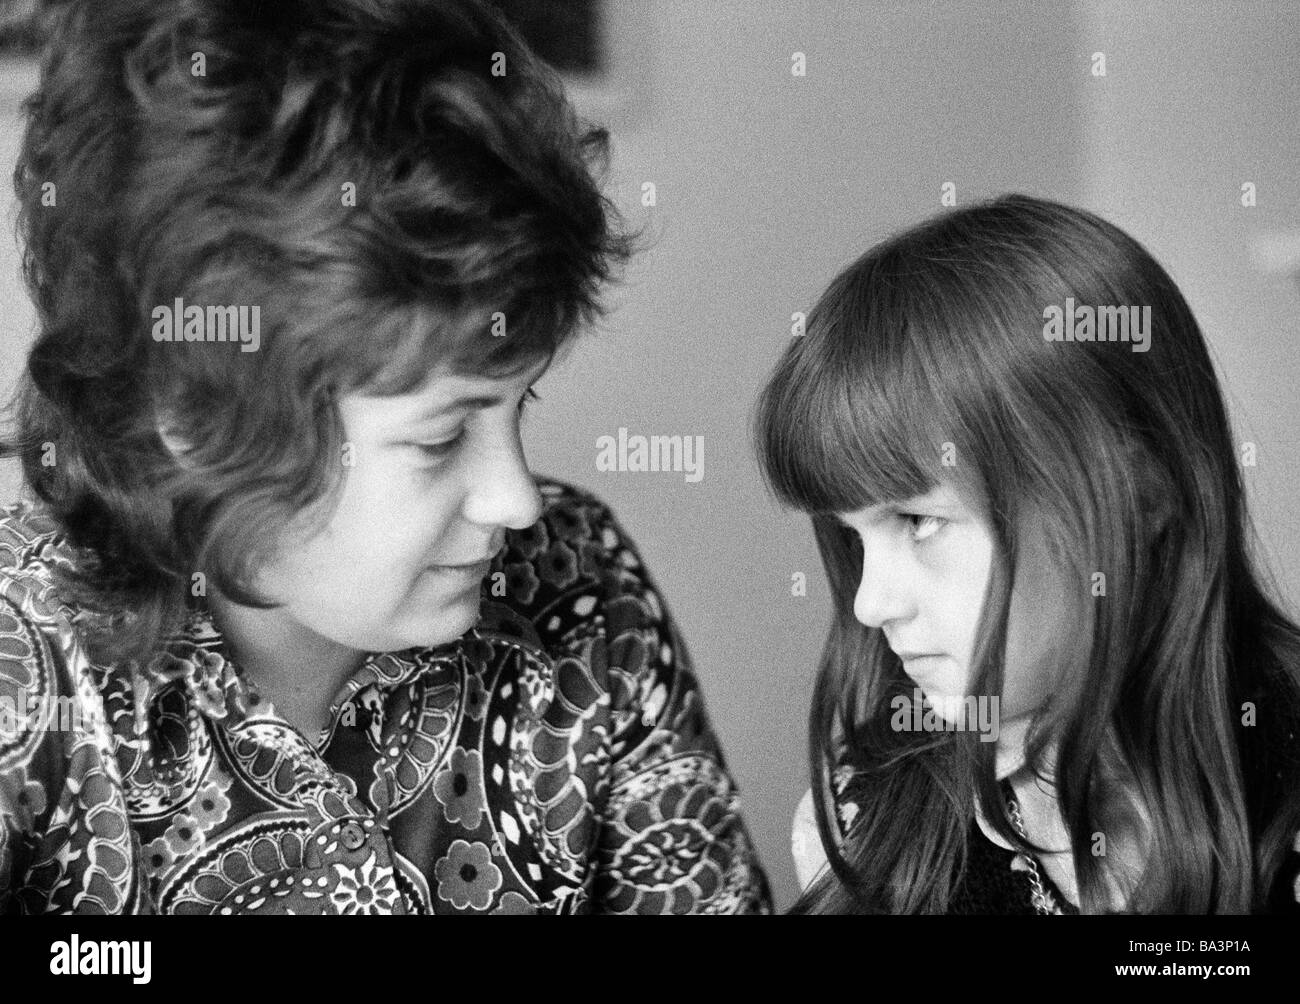 Seventies, black and white photo, people, young woman talking with a girl, aged 30 to 40 years, aged 10 to 12 years, Doris, Birgit Stock Photo